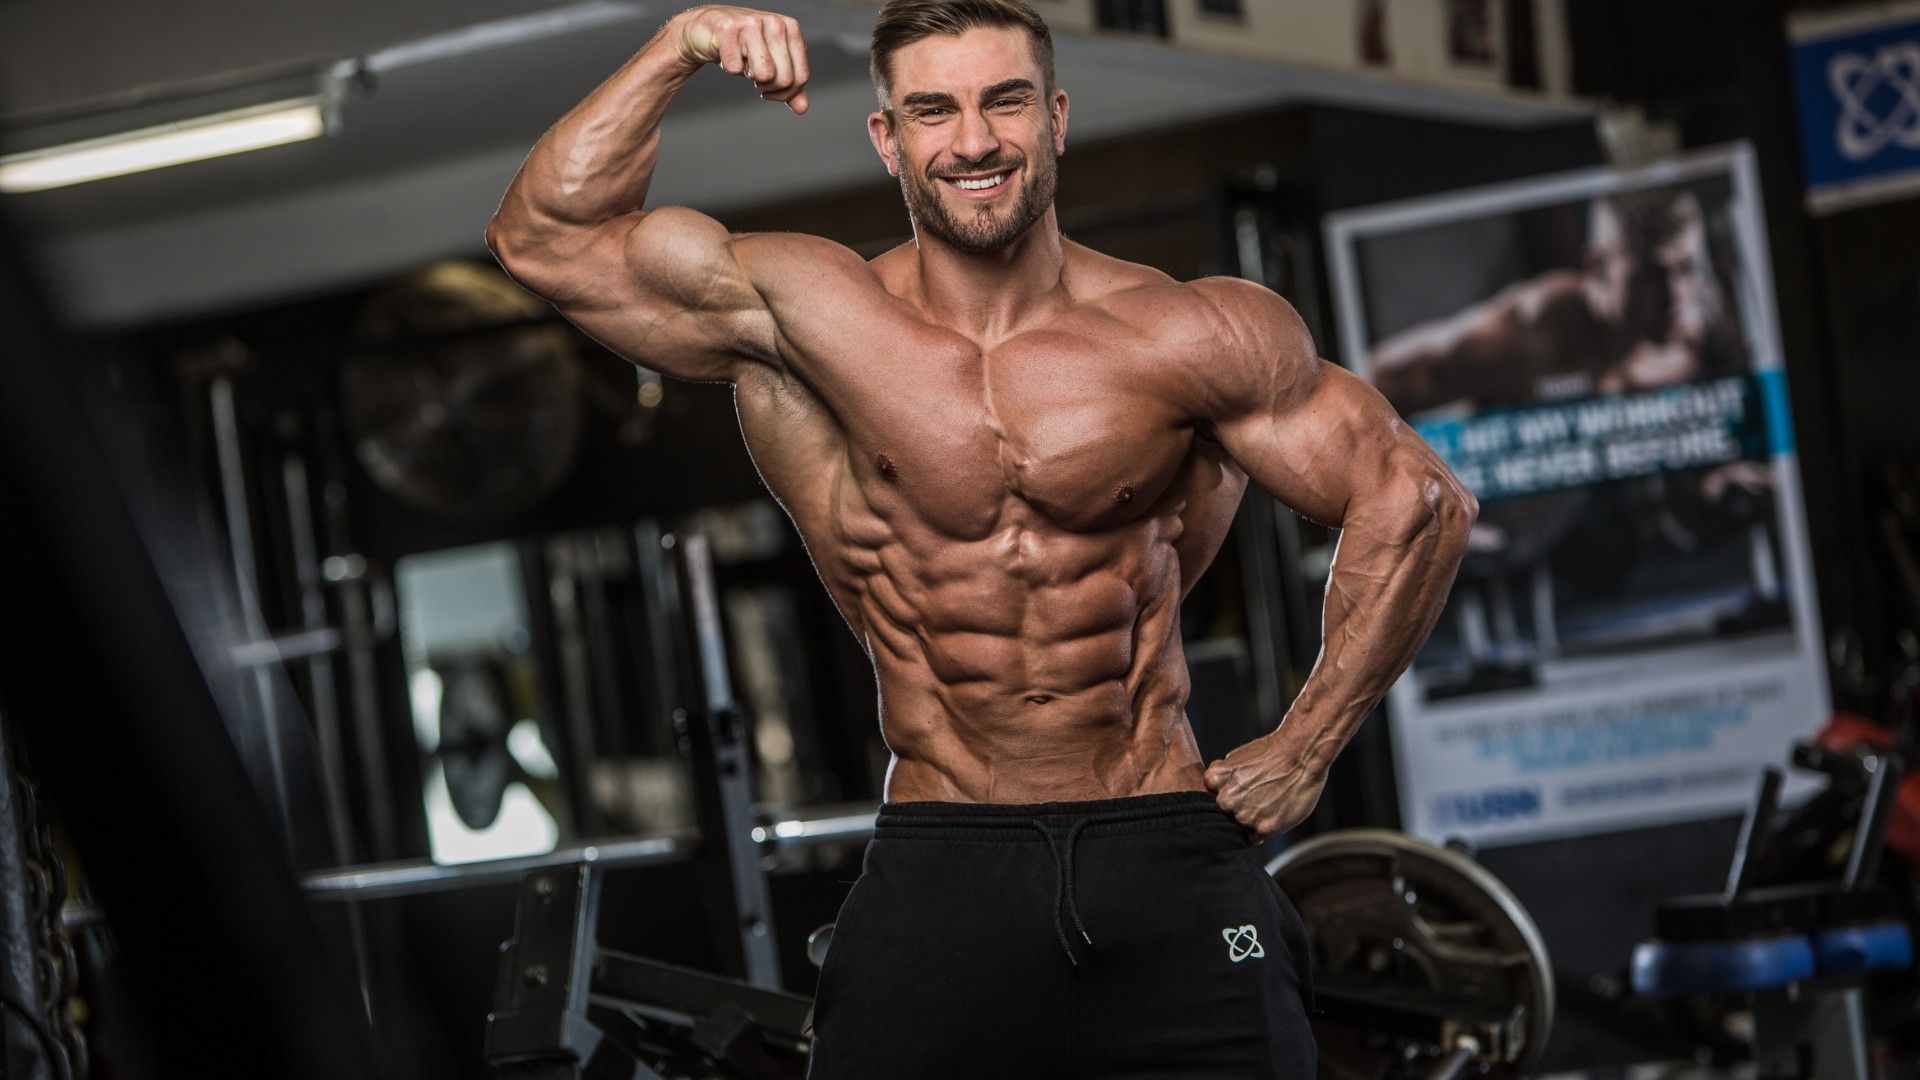 Pumping Iron: Ryan Terry on life as a professional bodybuilder